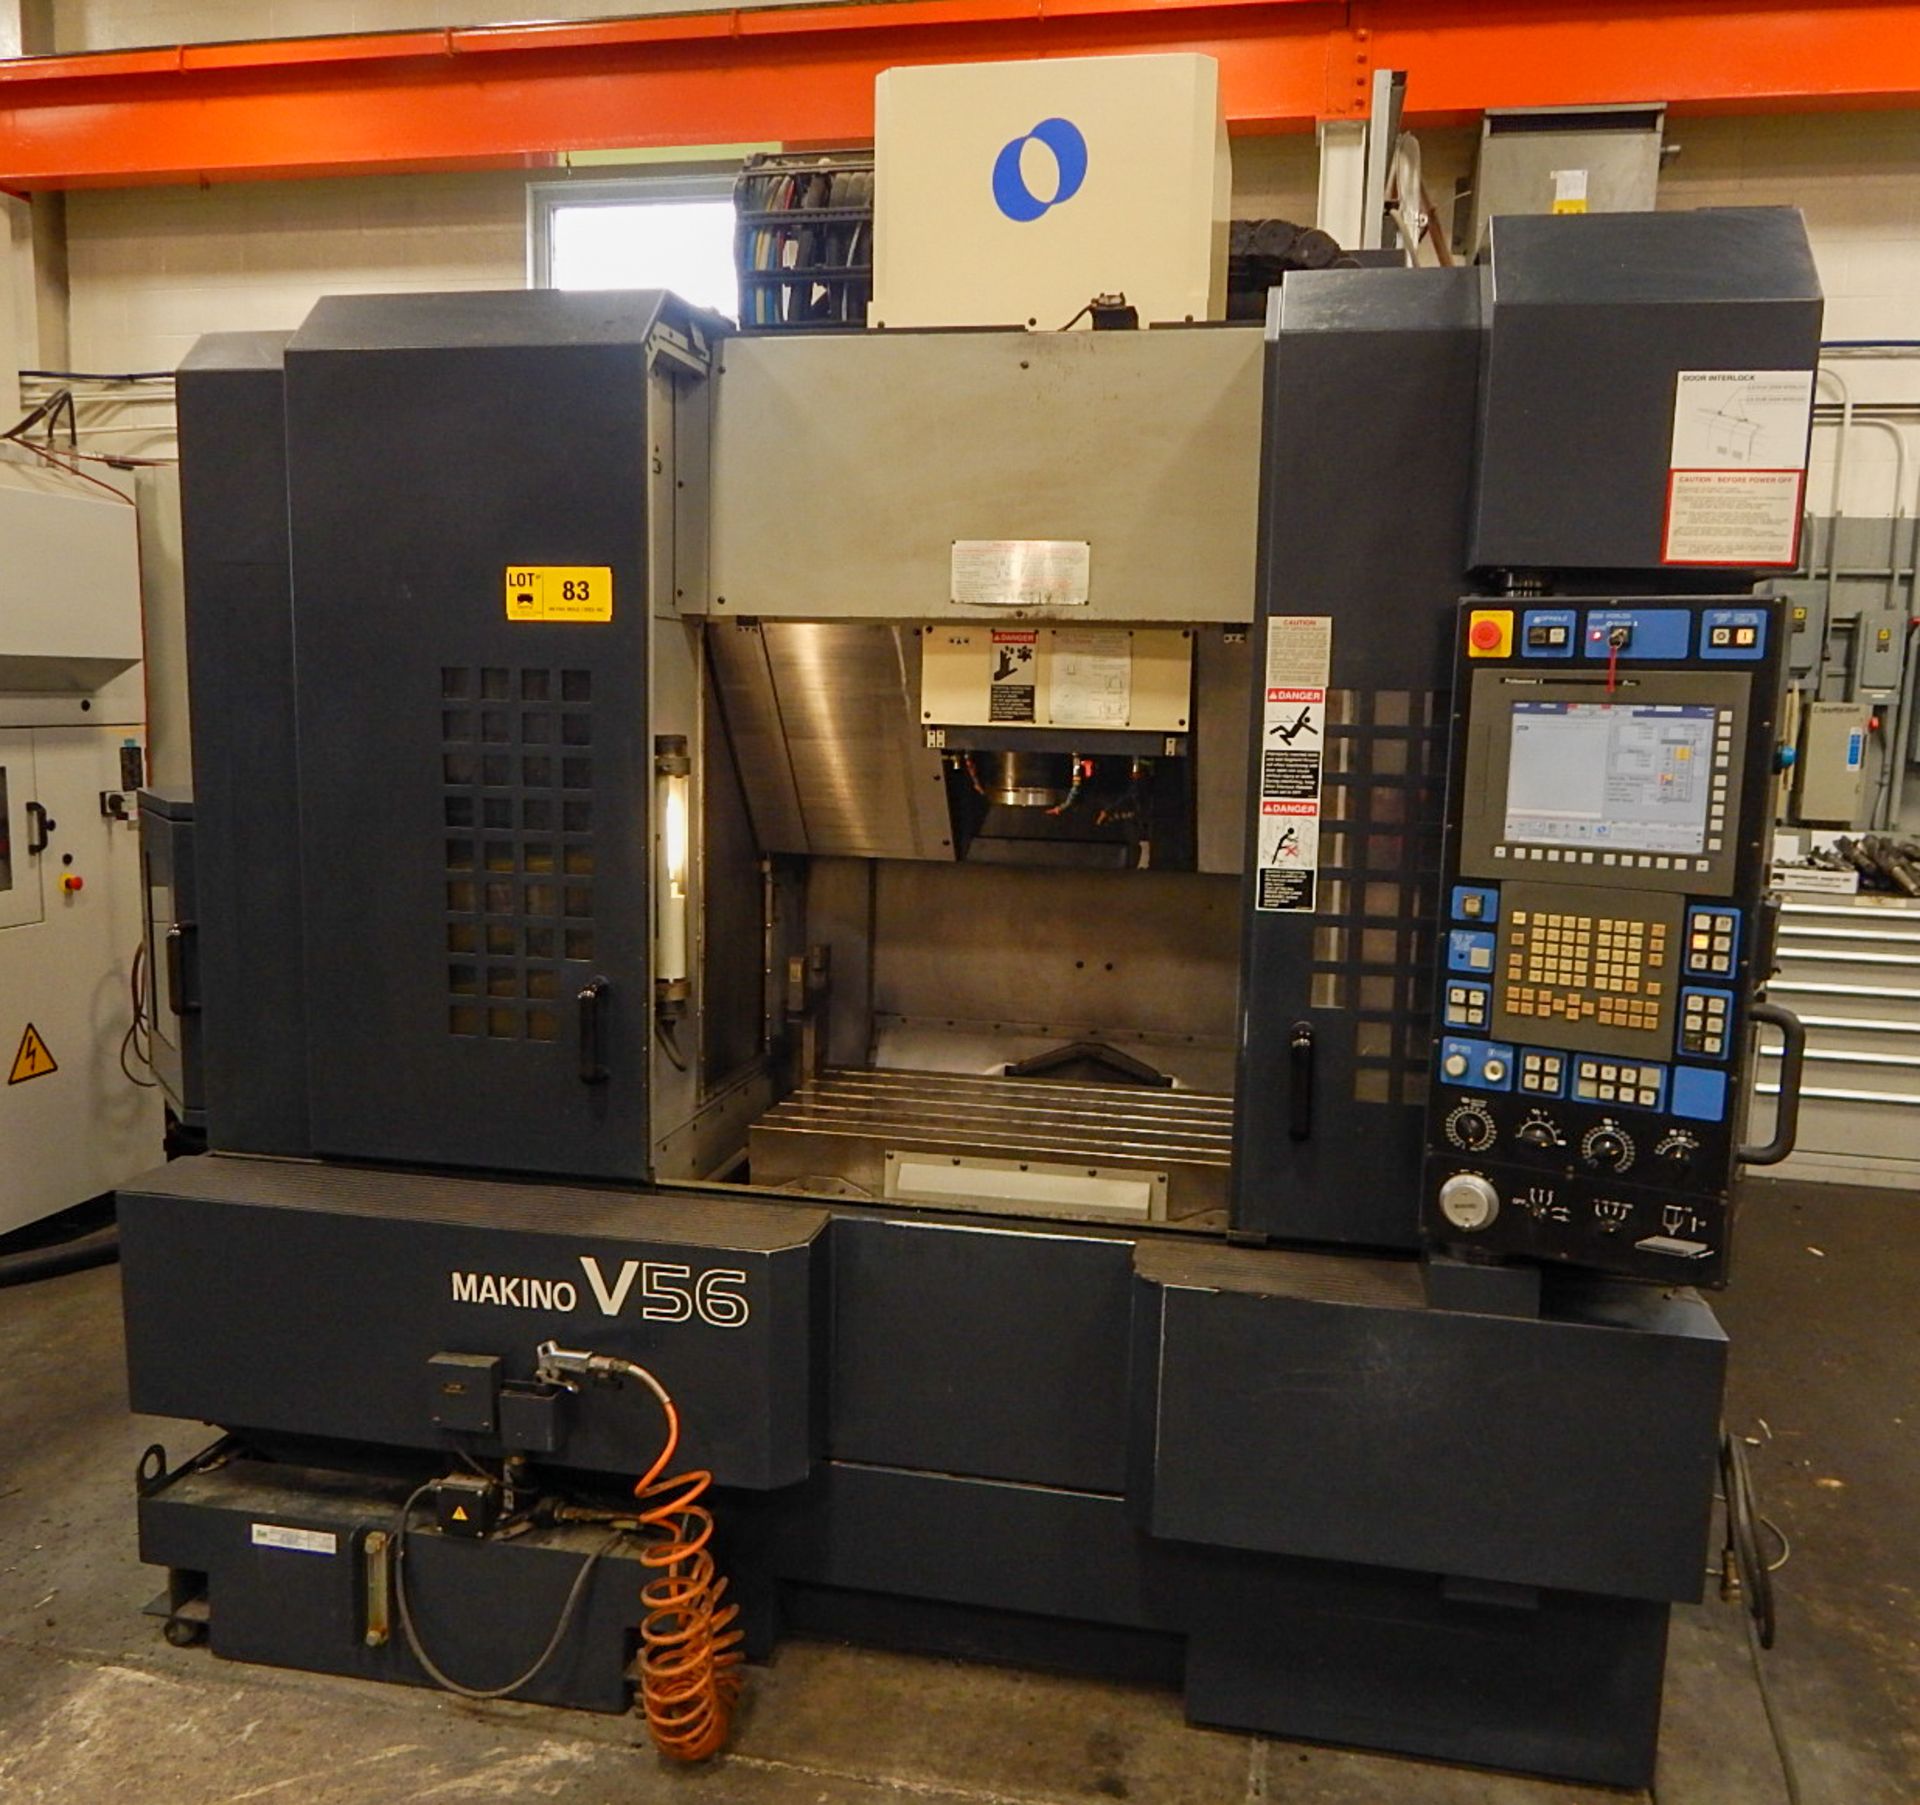 MAKINO (2005) V56 HIGH SPEED CNC VERTICAL MACHINING CENTER WITH MAKINO PROFESSIONAL 5 CNC CONTROL, - Image 2 of 8